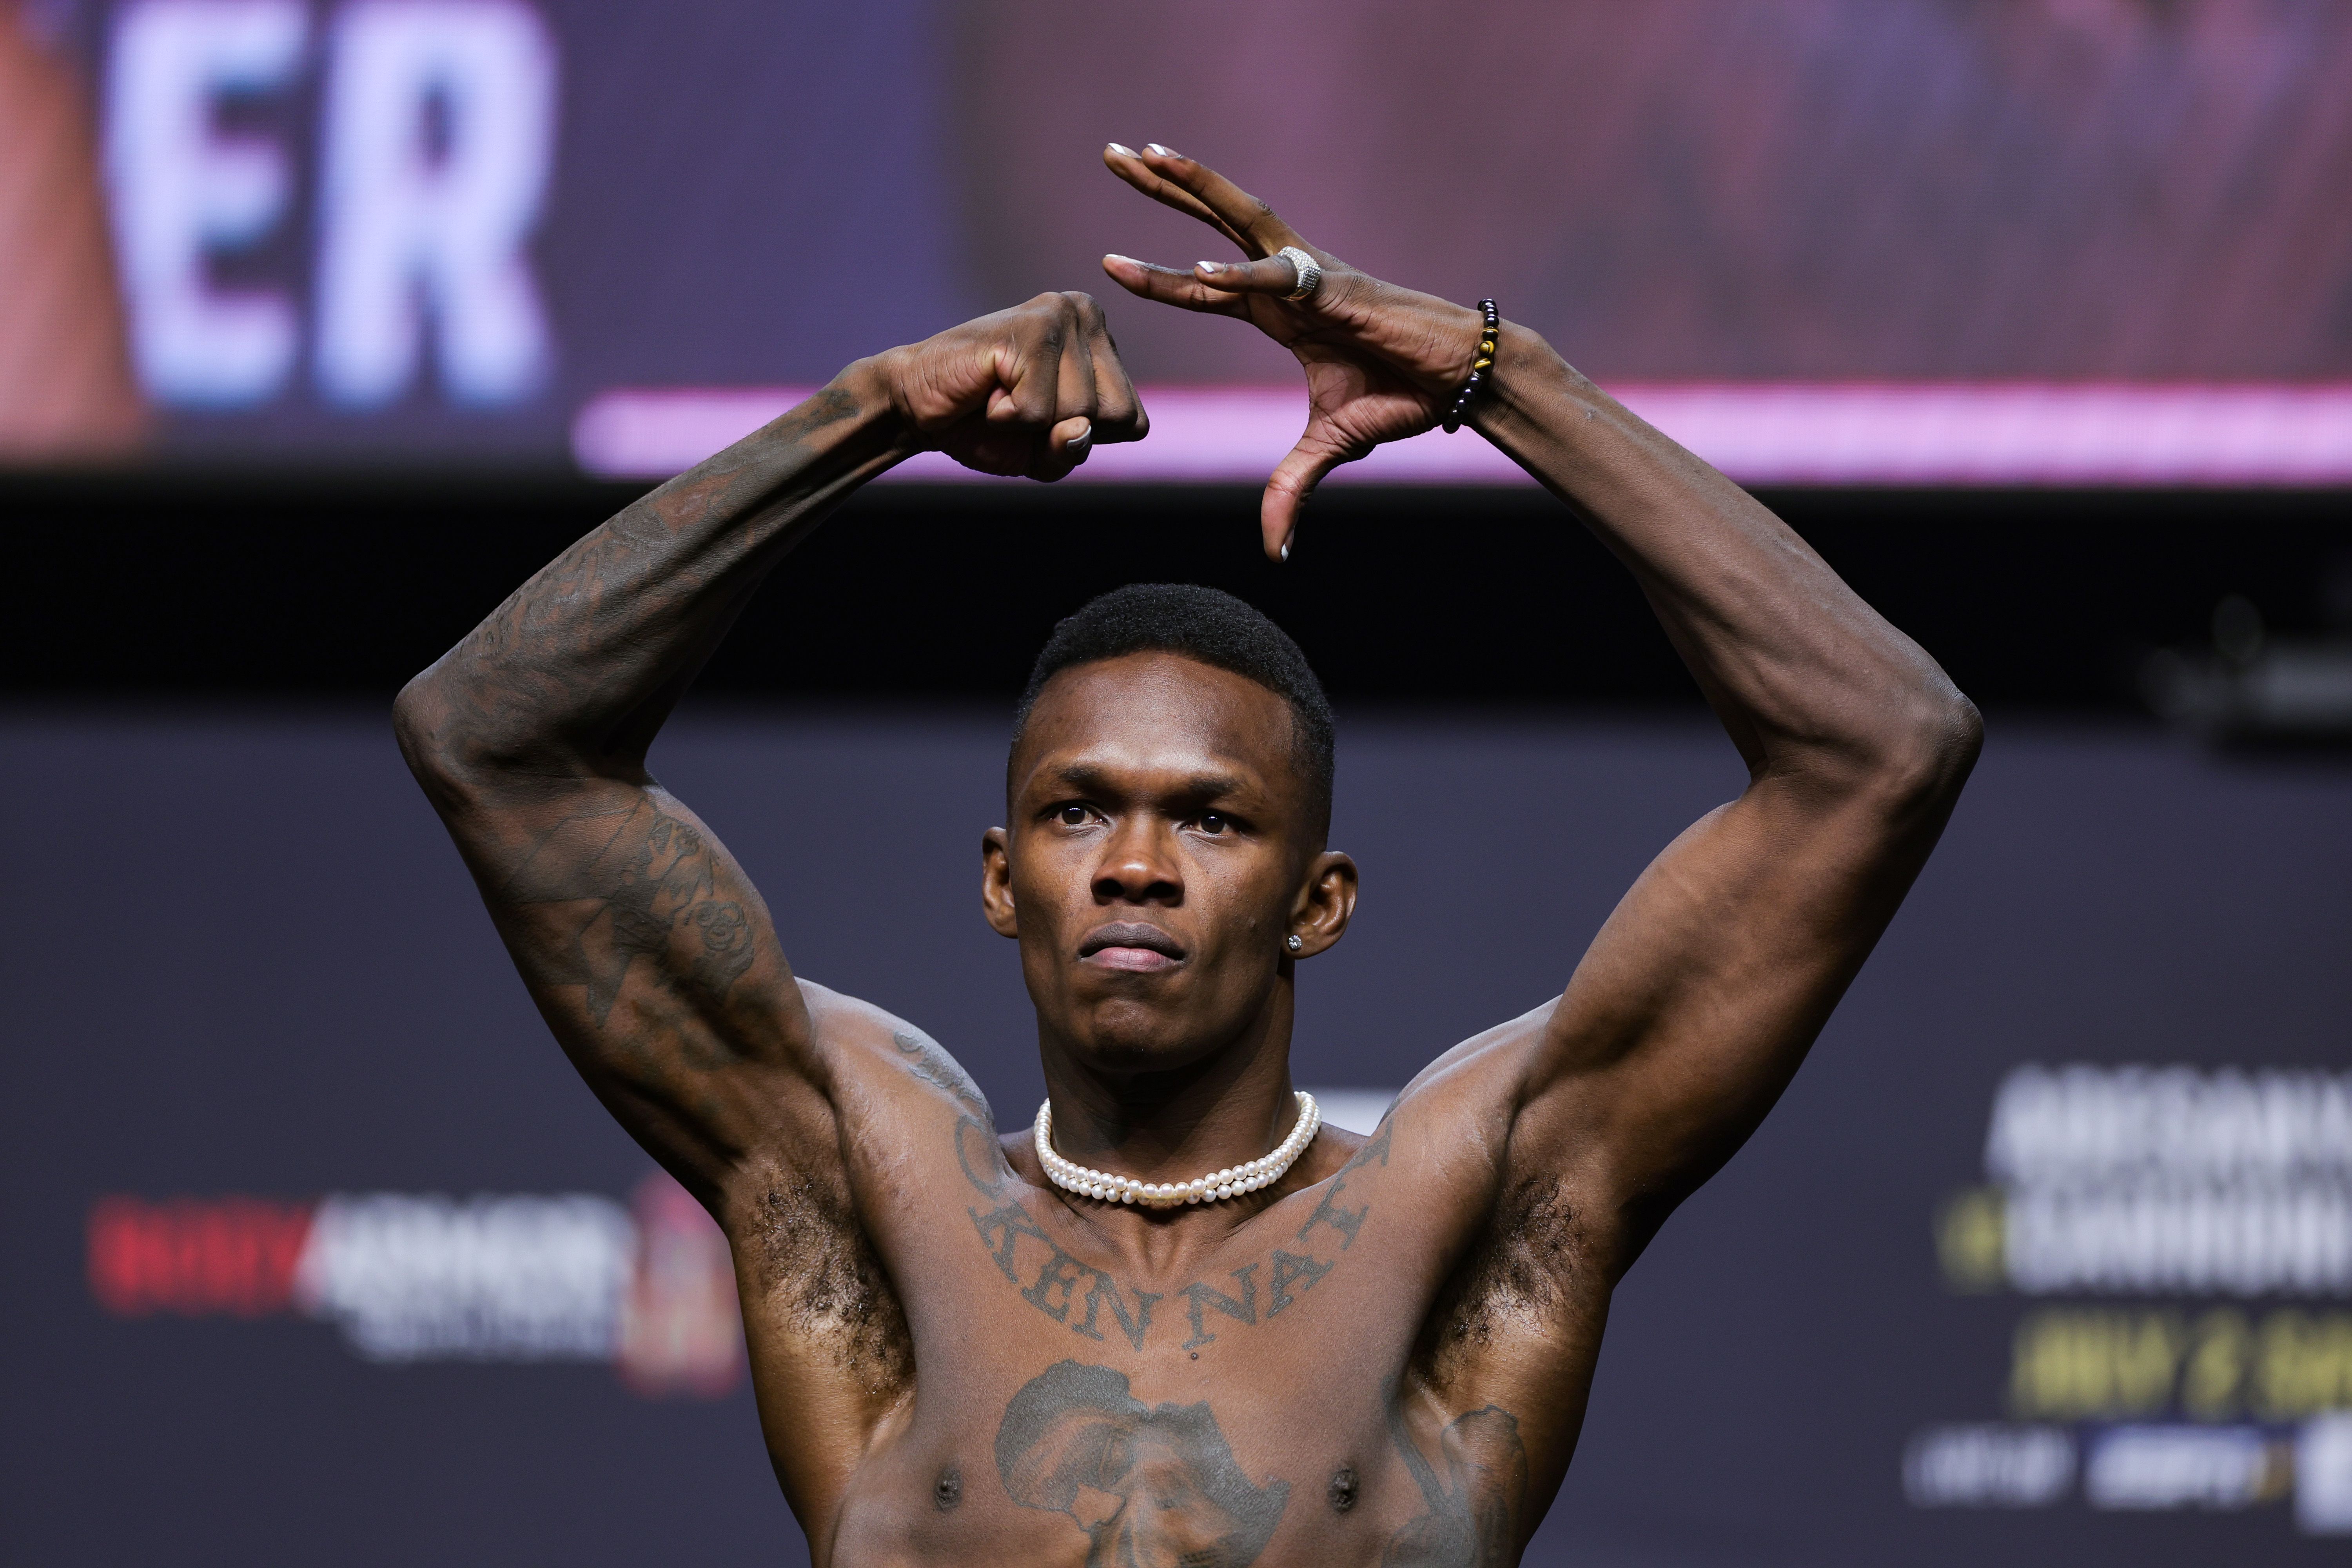 Israel Adesanya at a UFC weigh in event